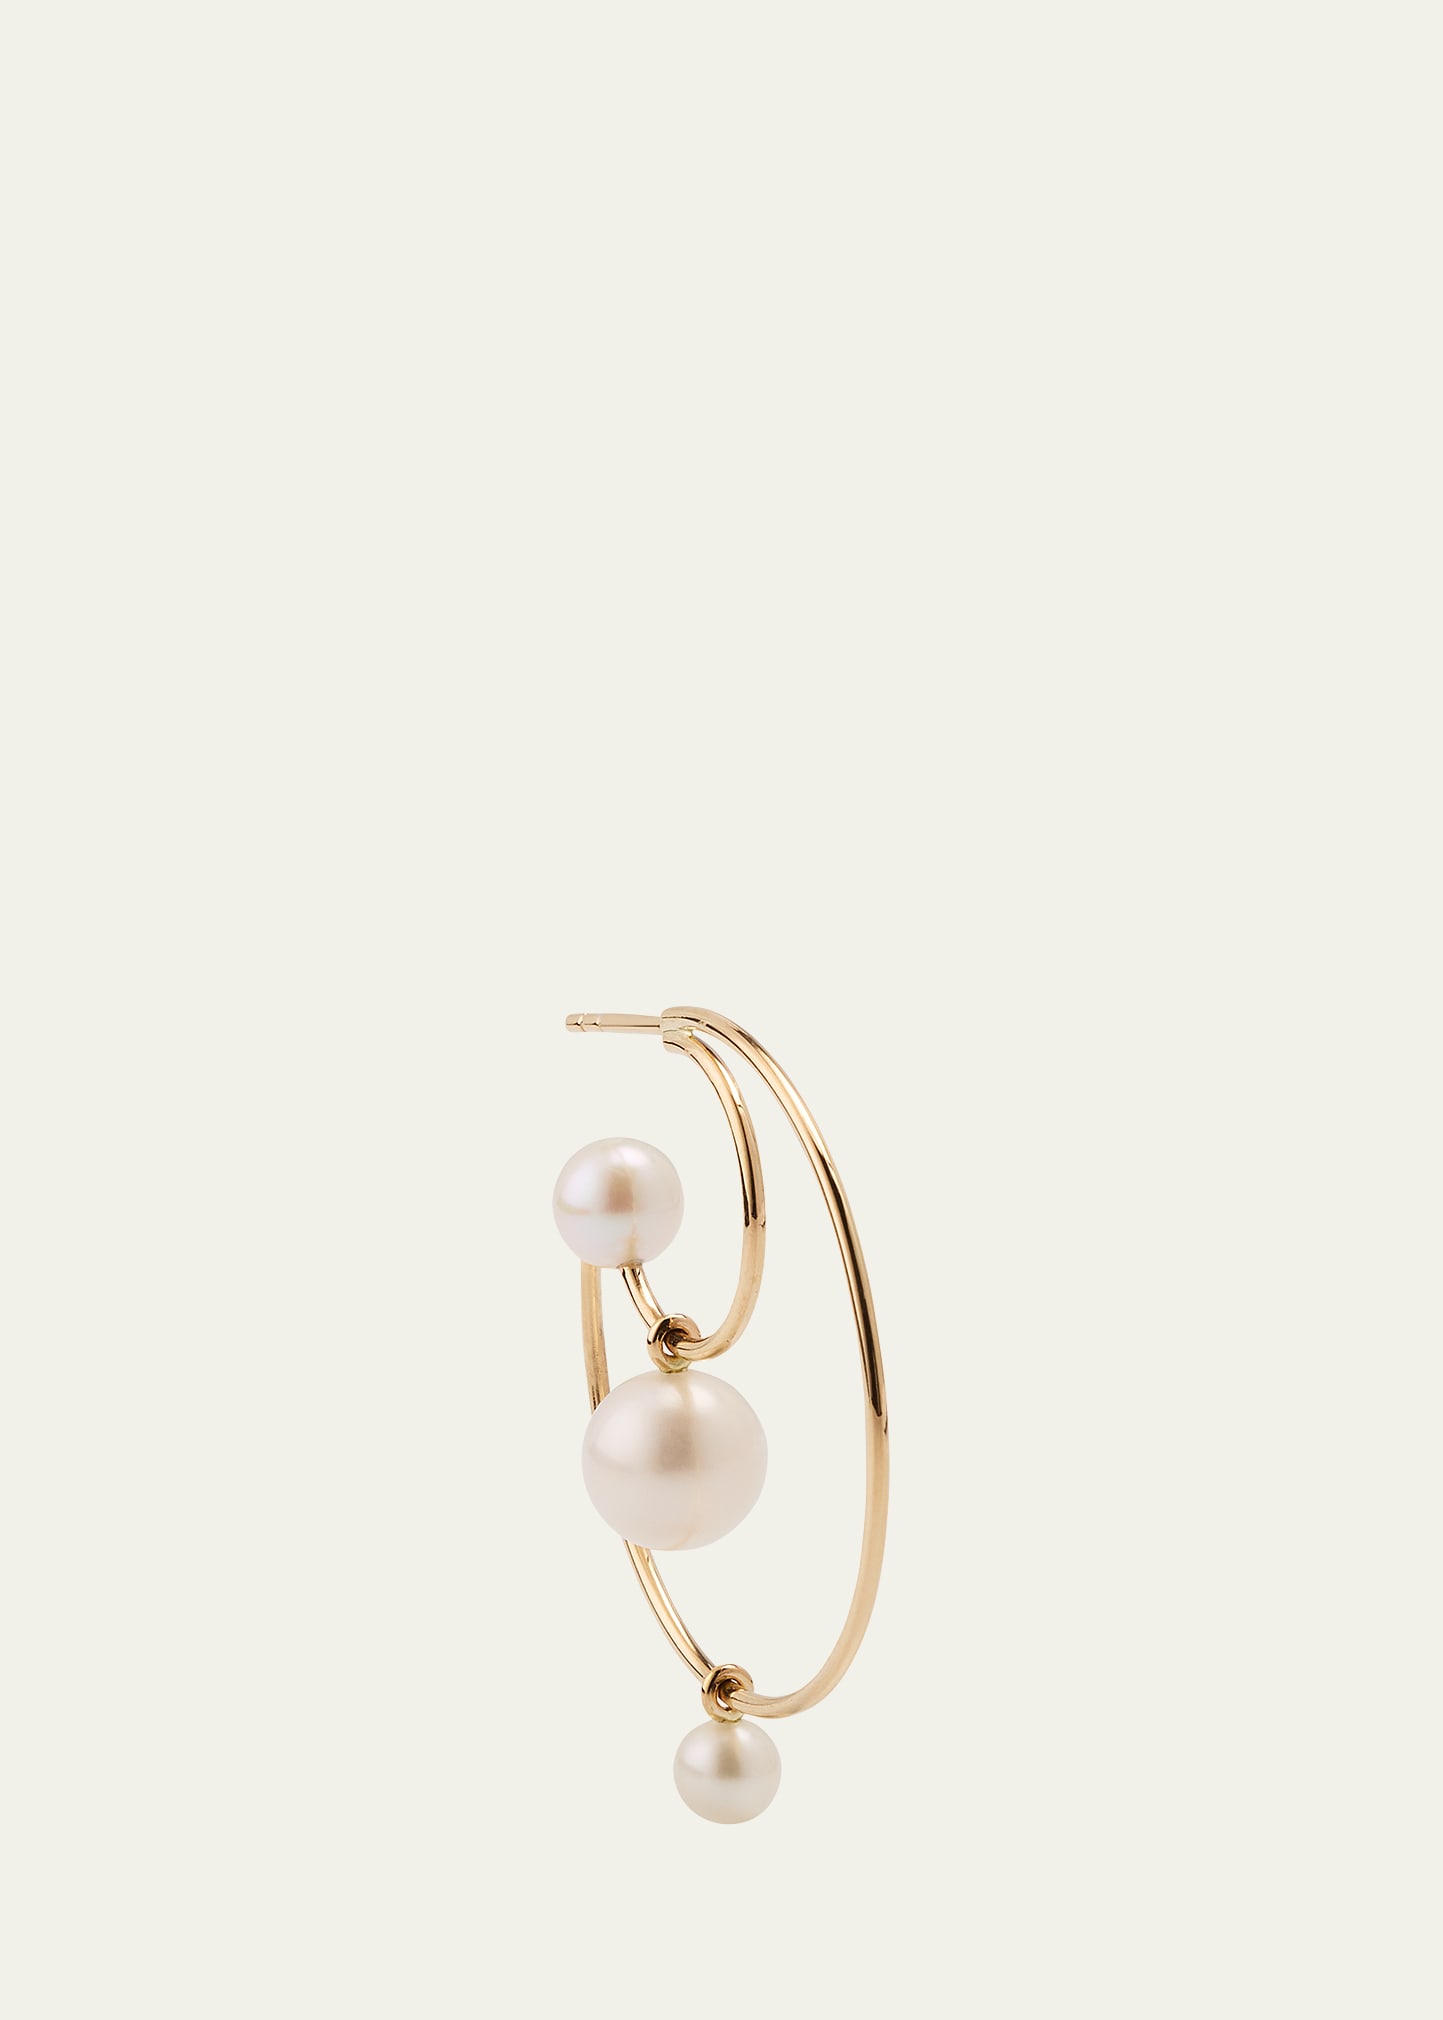 Sophie Bille Brahe Bain Perle Double Hoop Earring With Freshwater Pearls And 14k Yellow Gold, Single In Yg